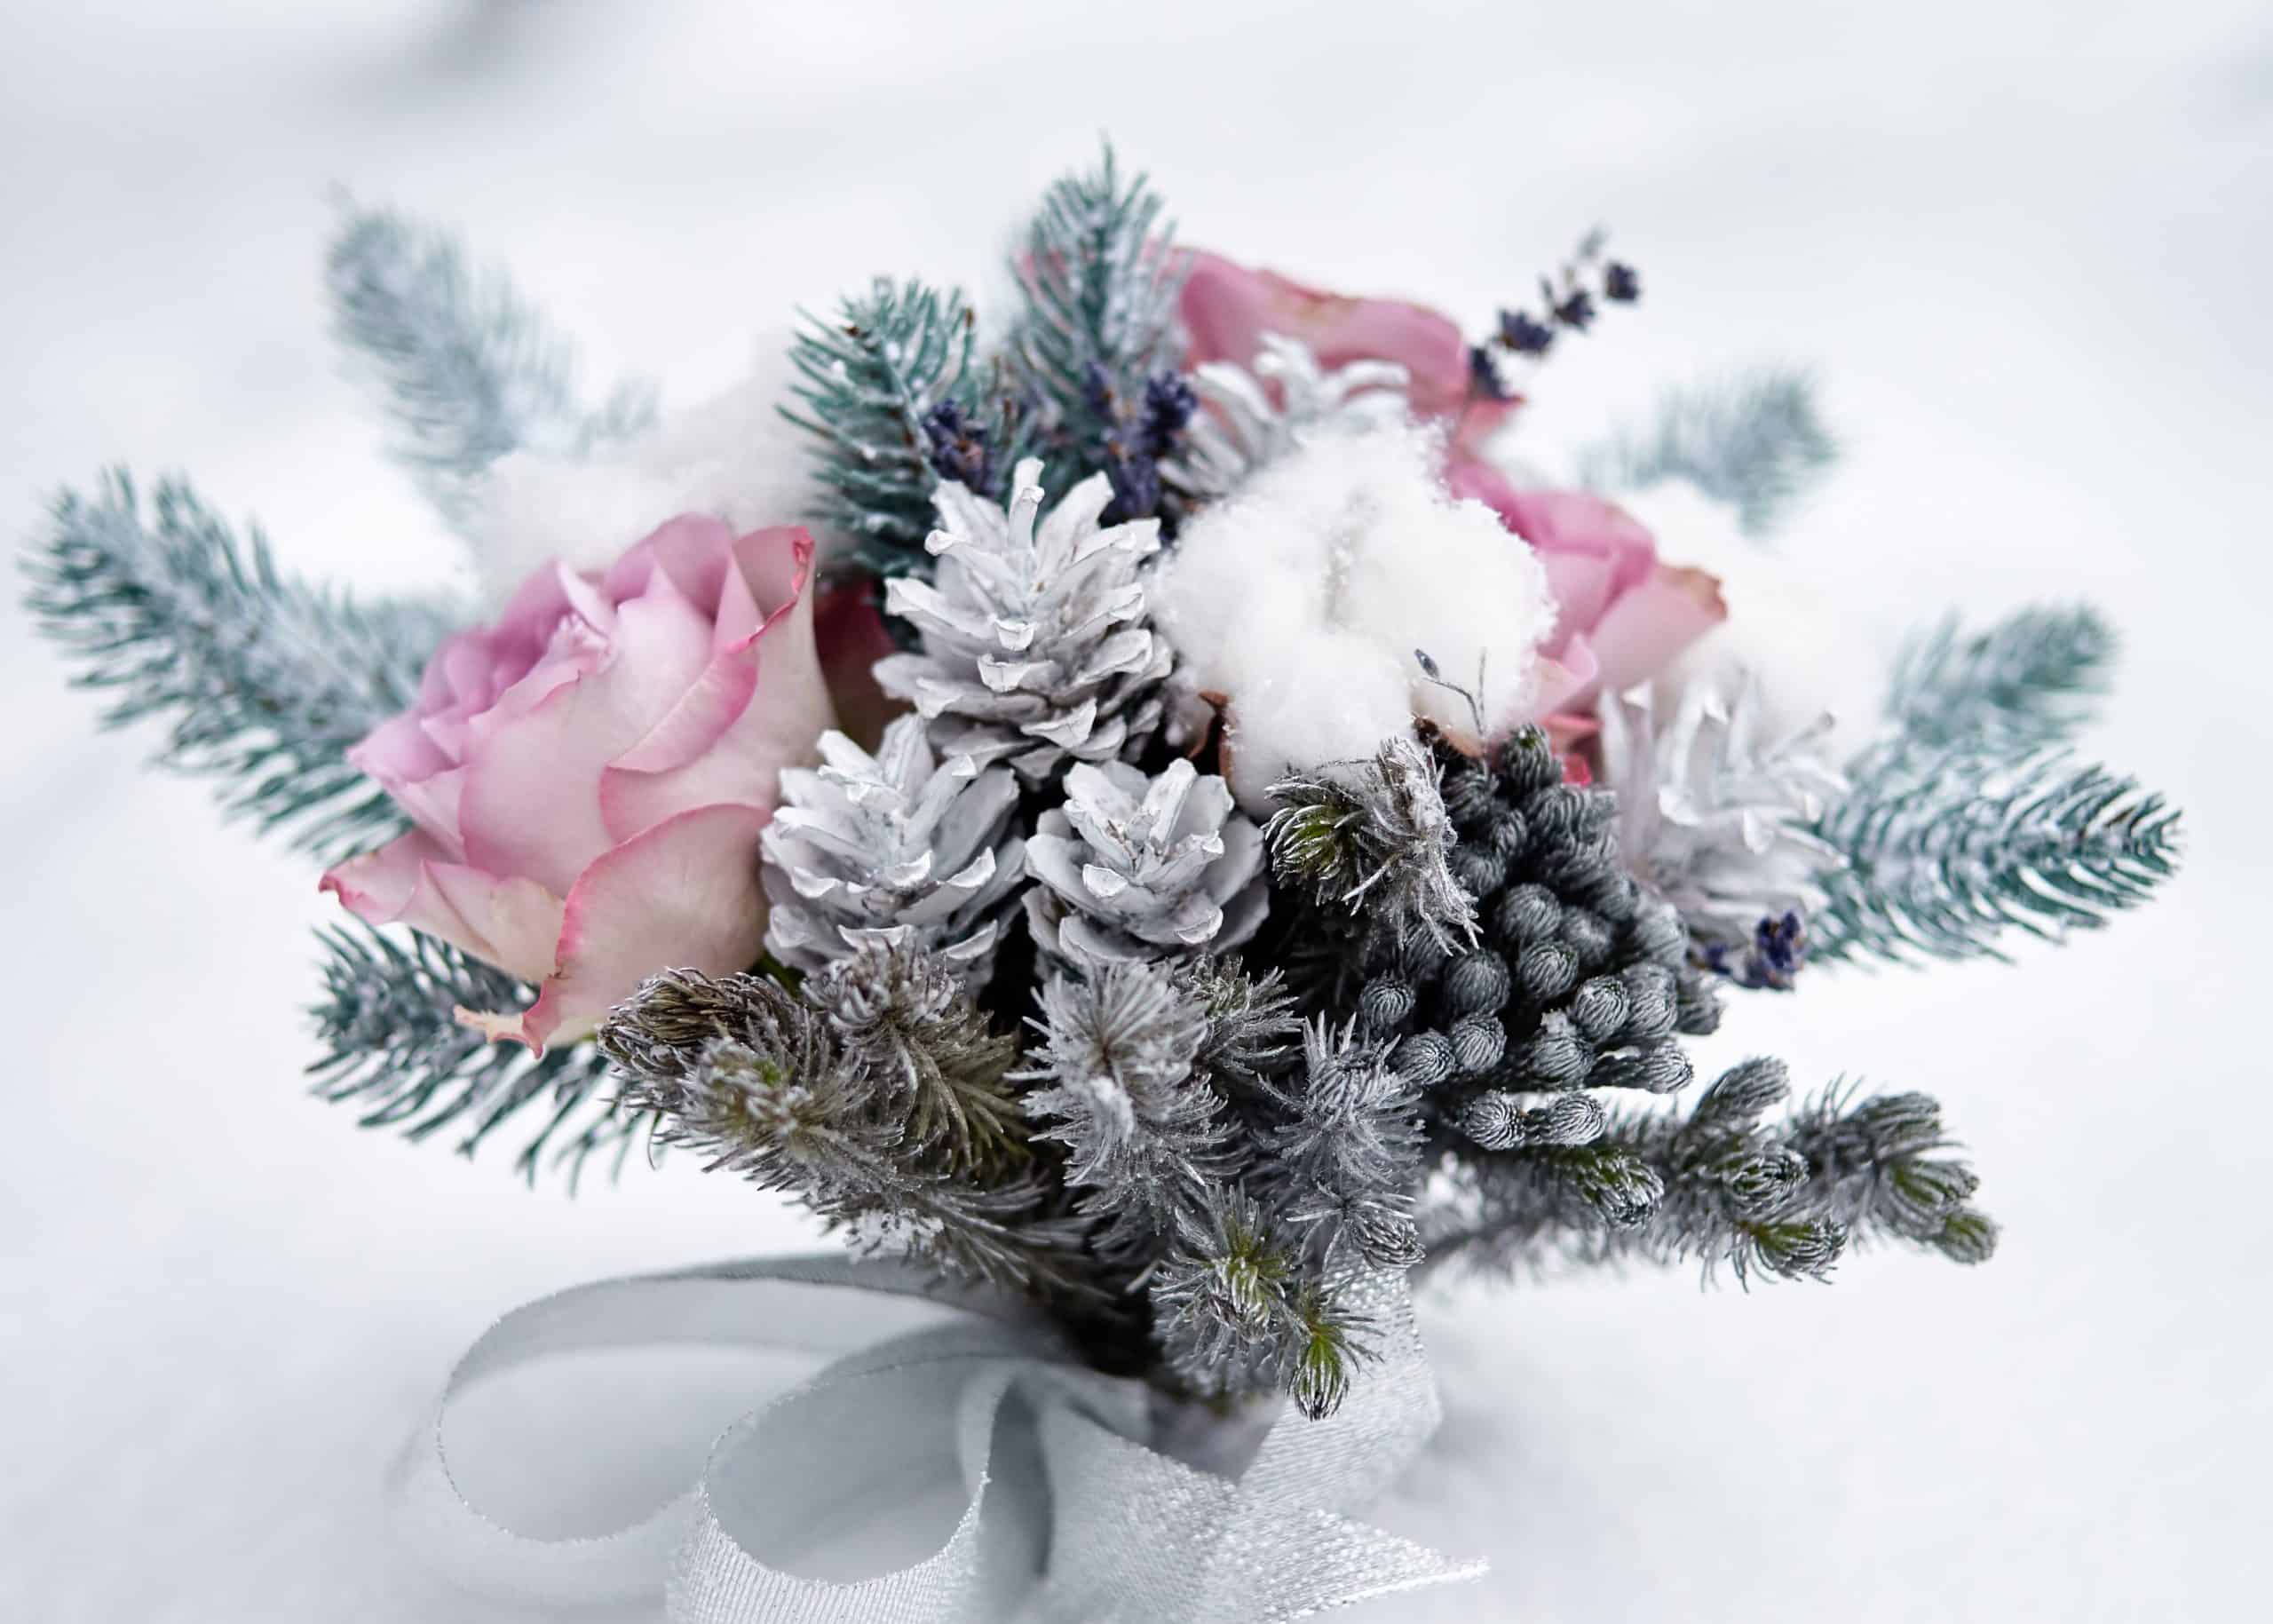 Winter Blooming Flowers for Your Bridal Bouquet - Cascade Floral